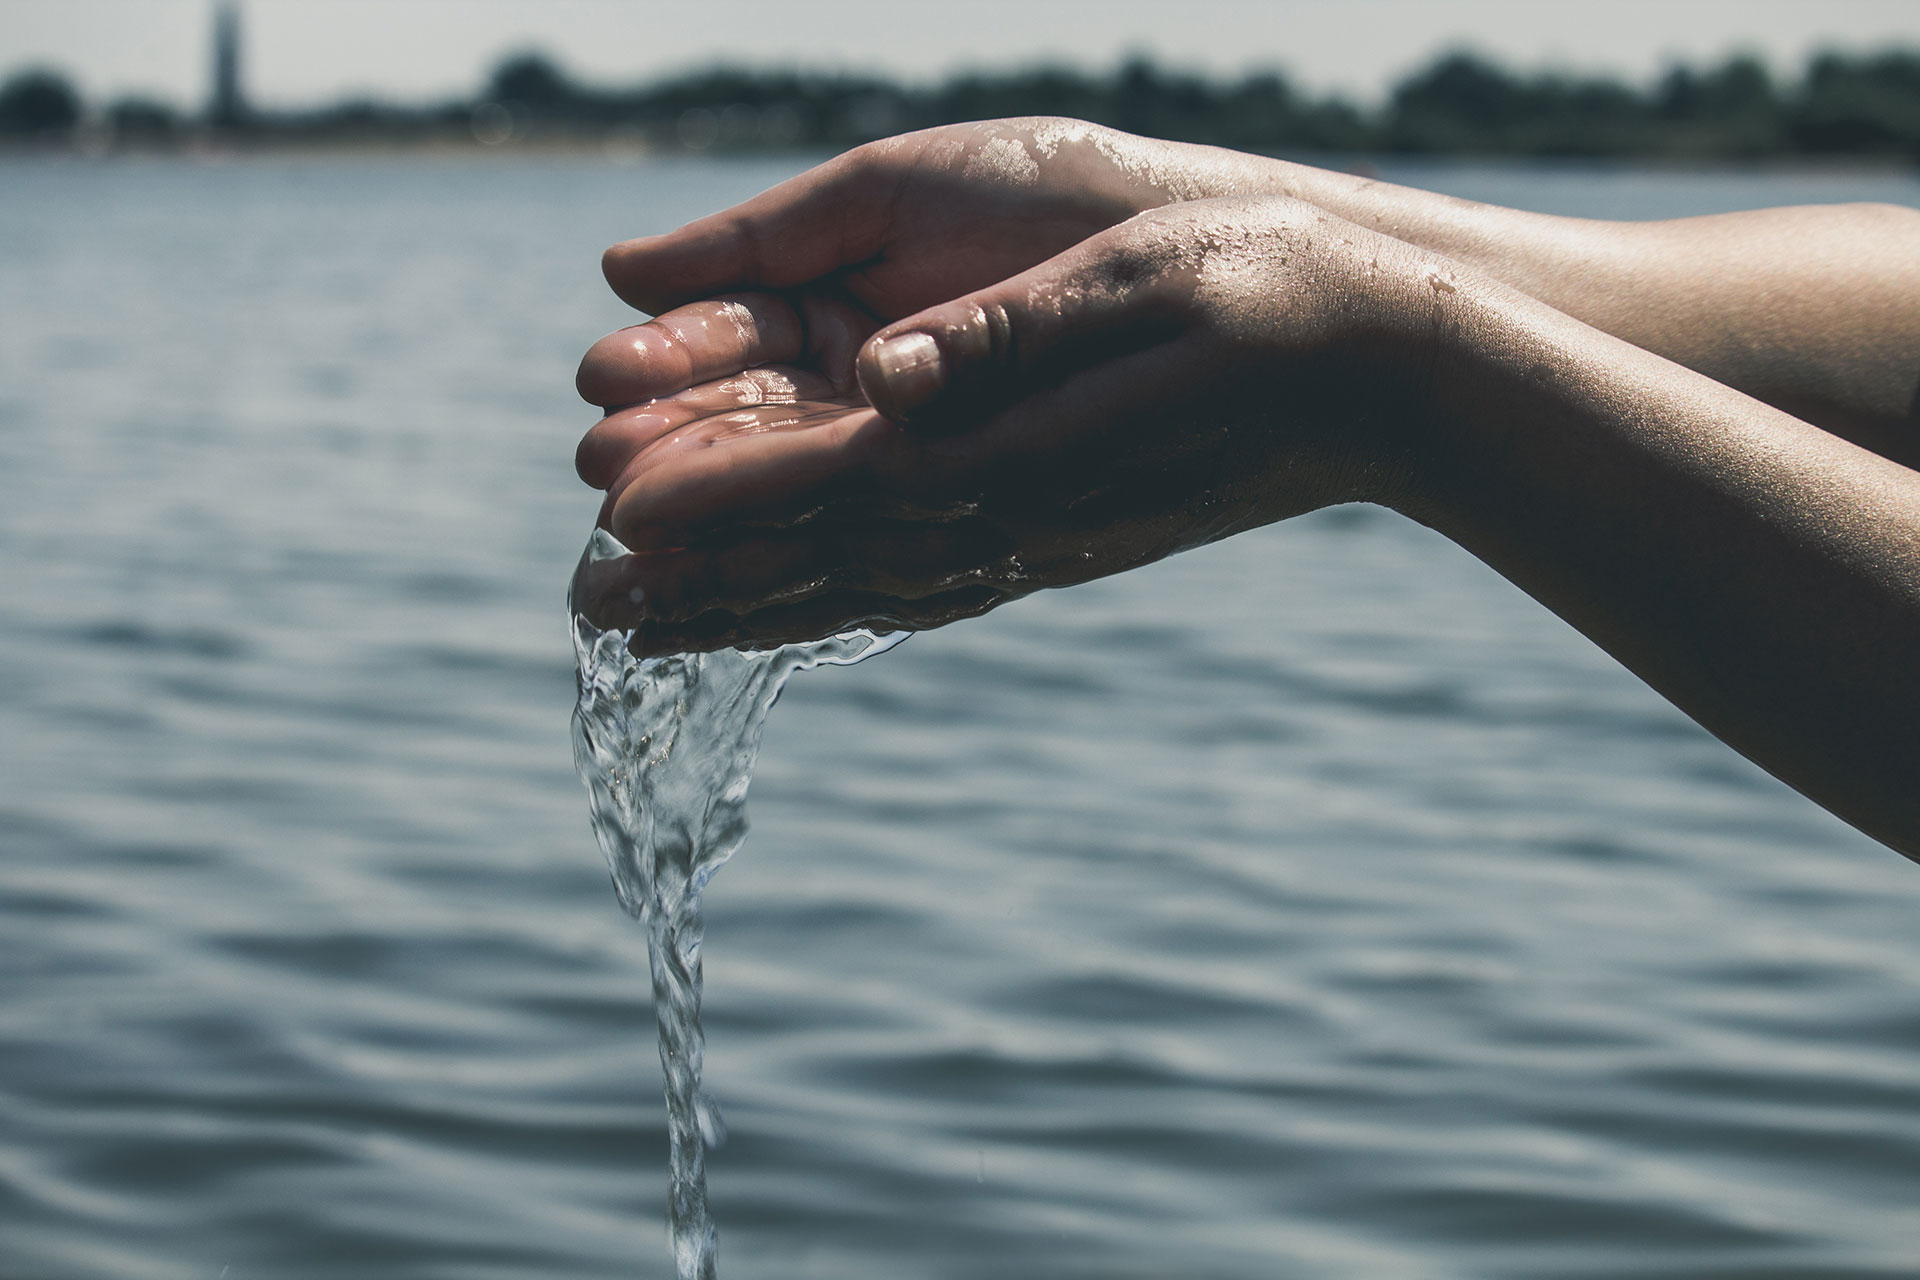 Water in Hands, Activity, Hands, Human, River, HQ Photo